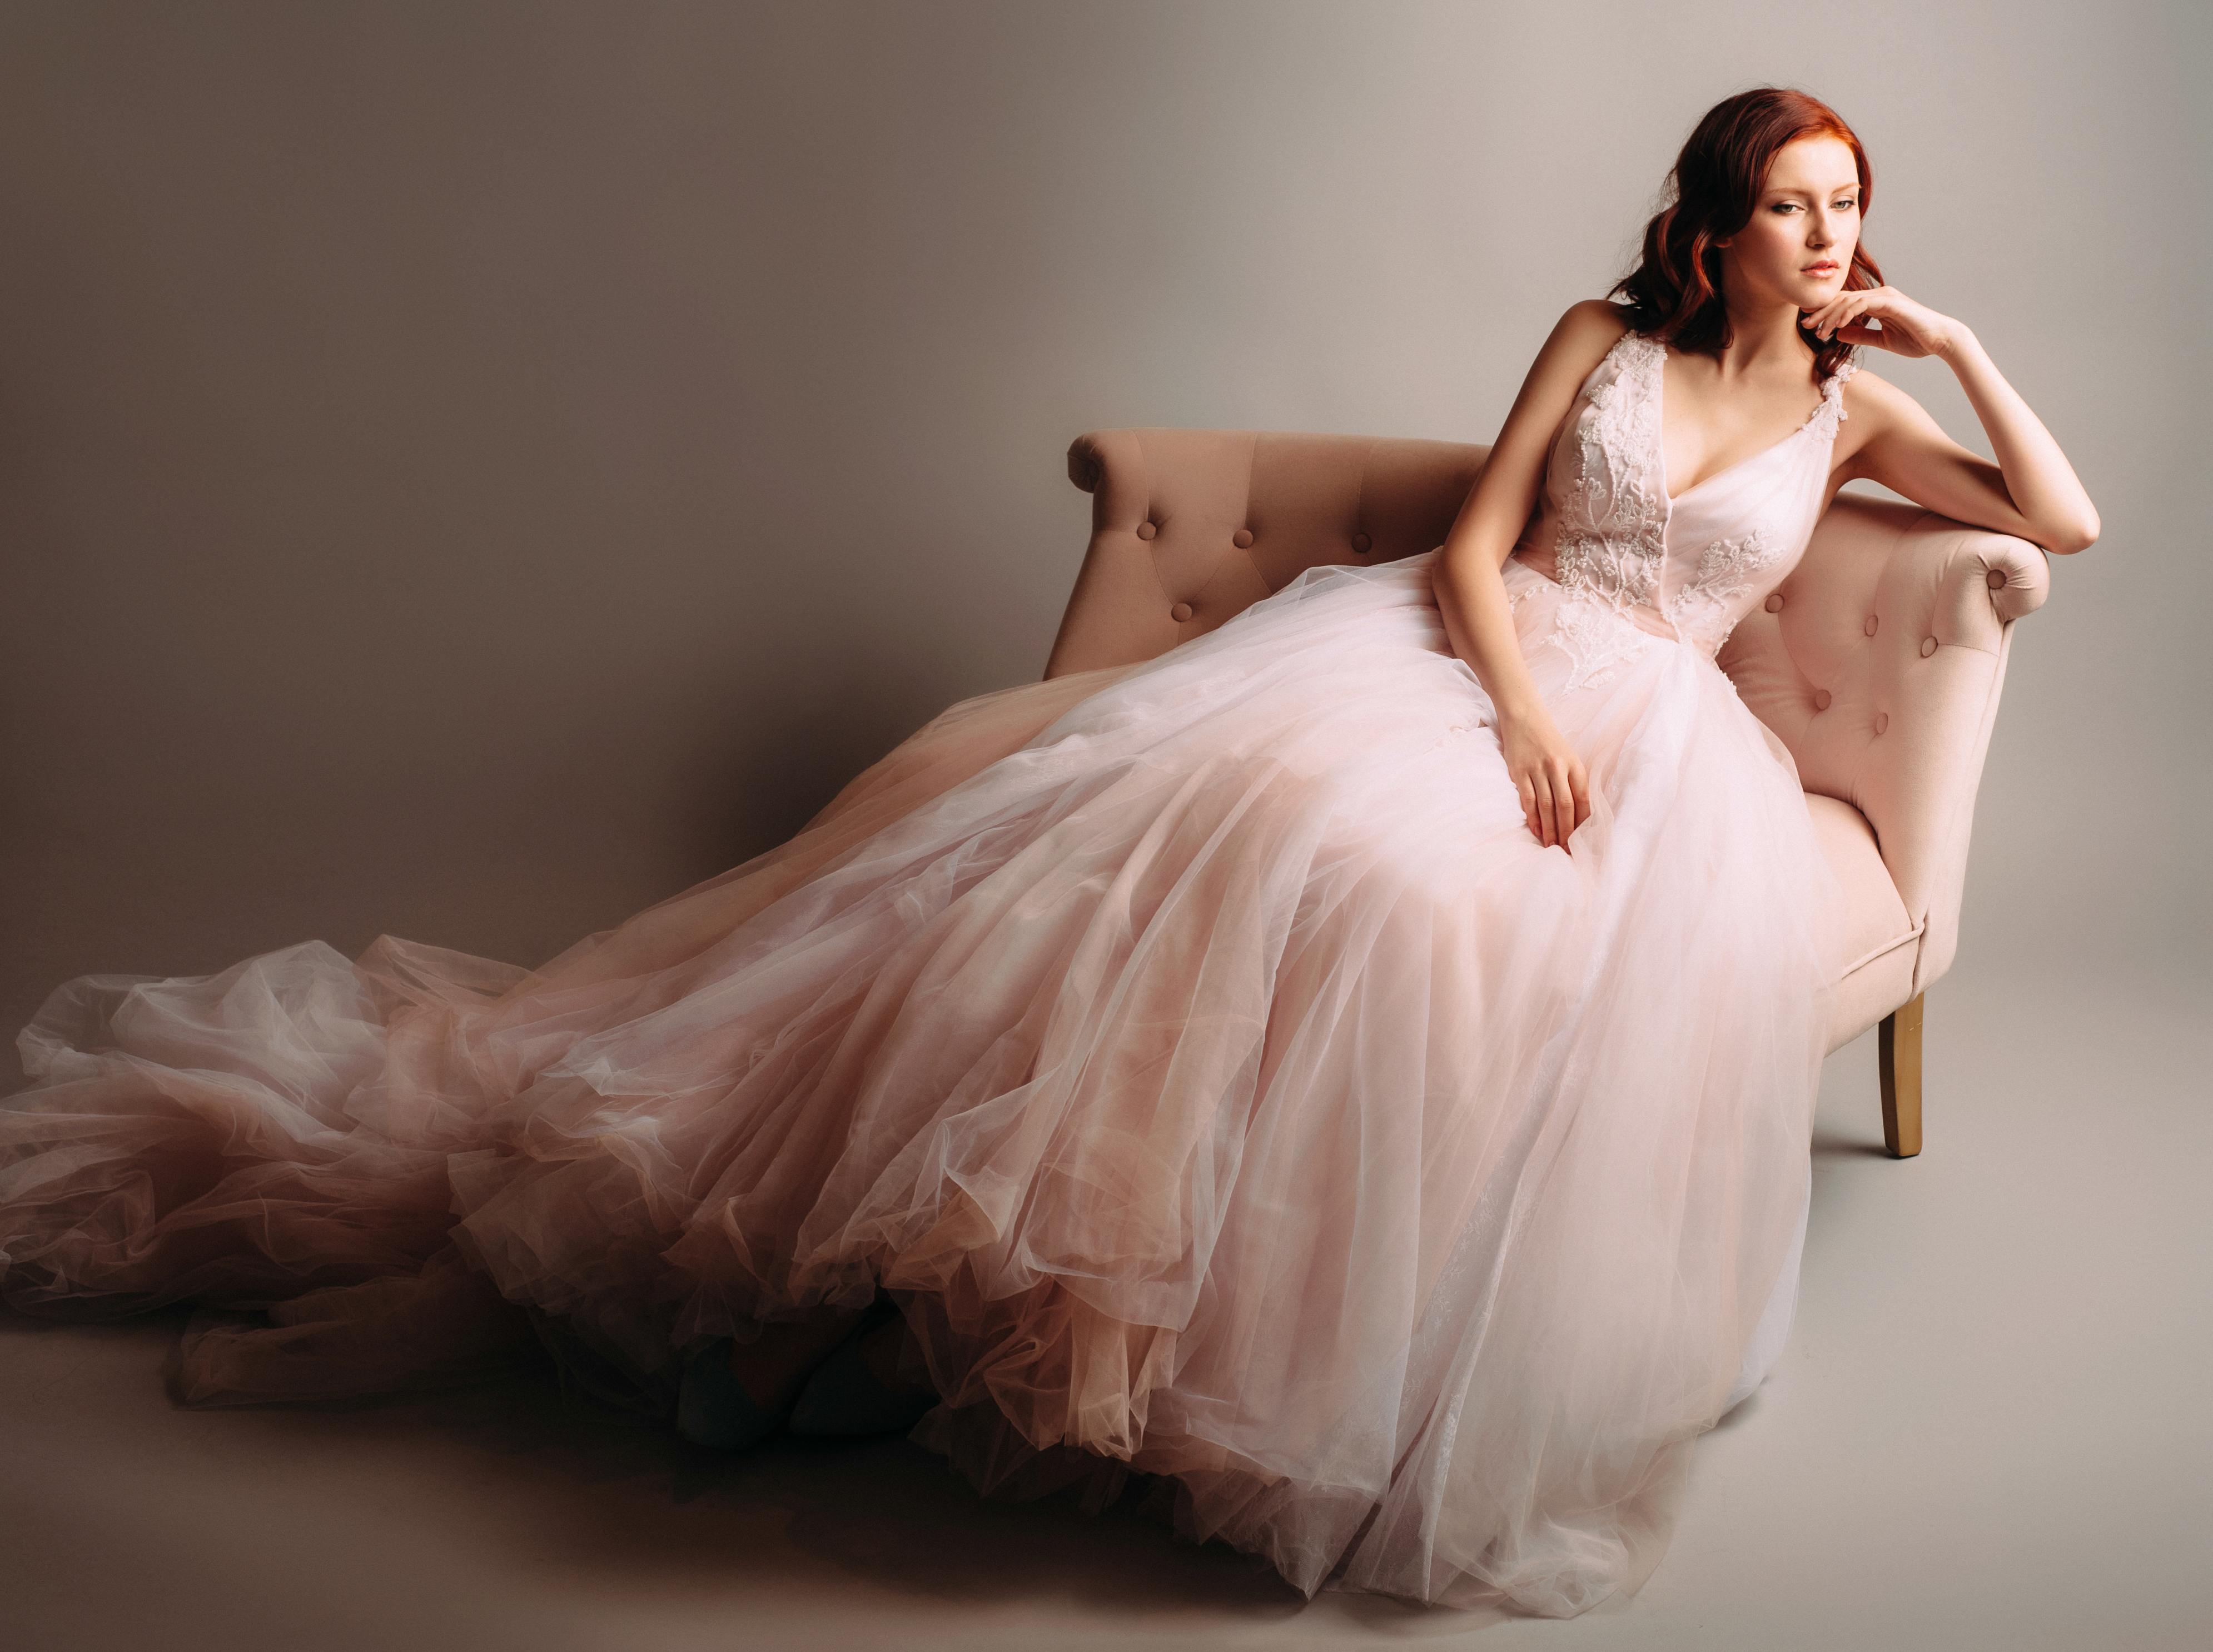 Redheaded bride in a pink wedding dress sitting in a vintage sofa. Studio portrait on neutral background.